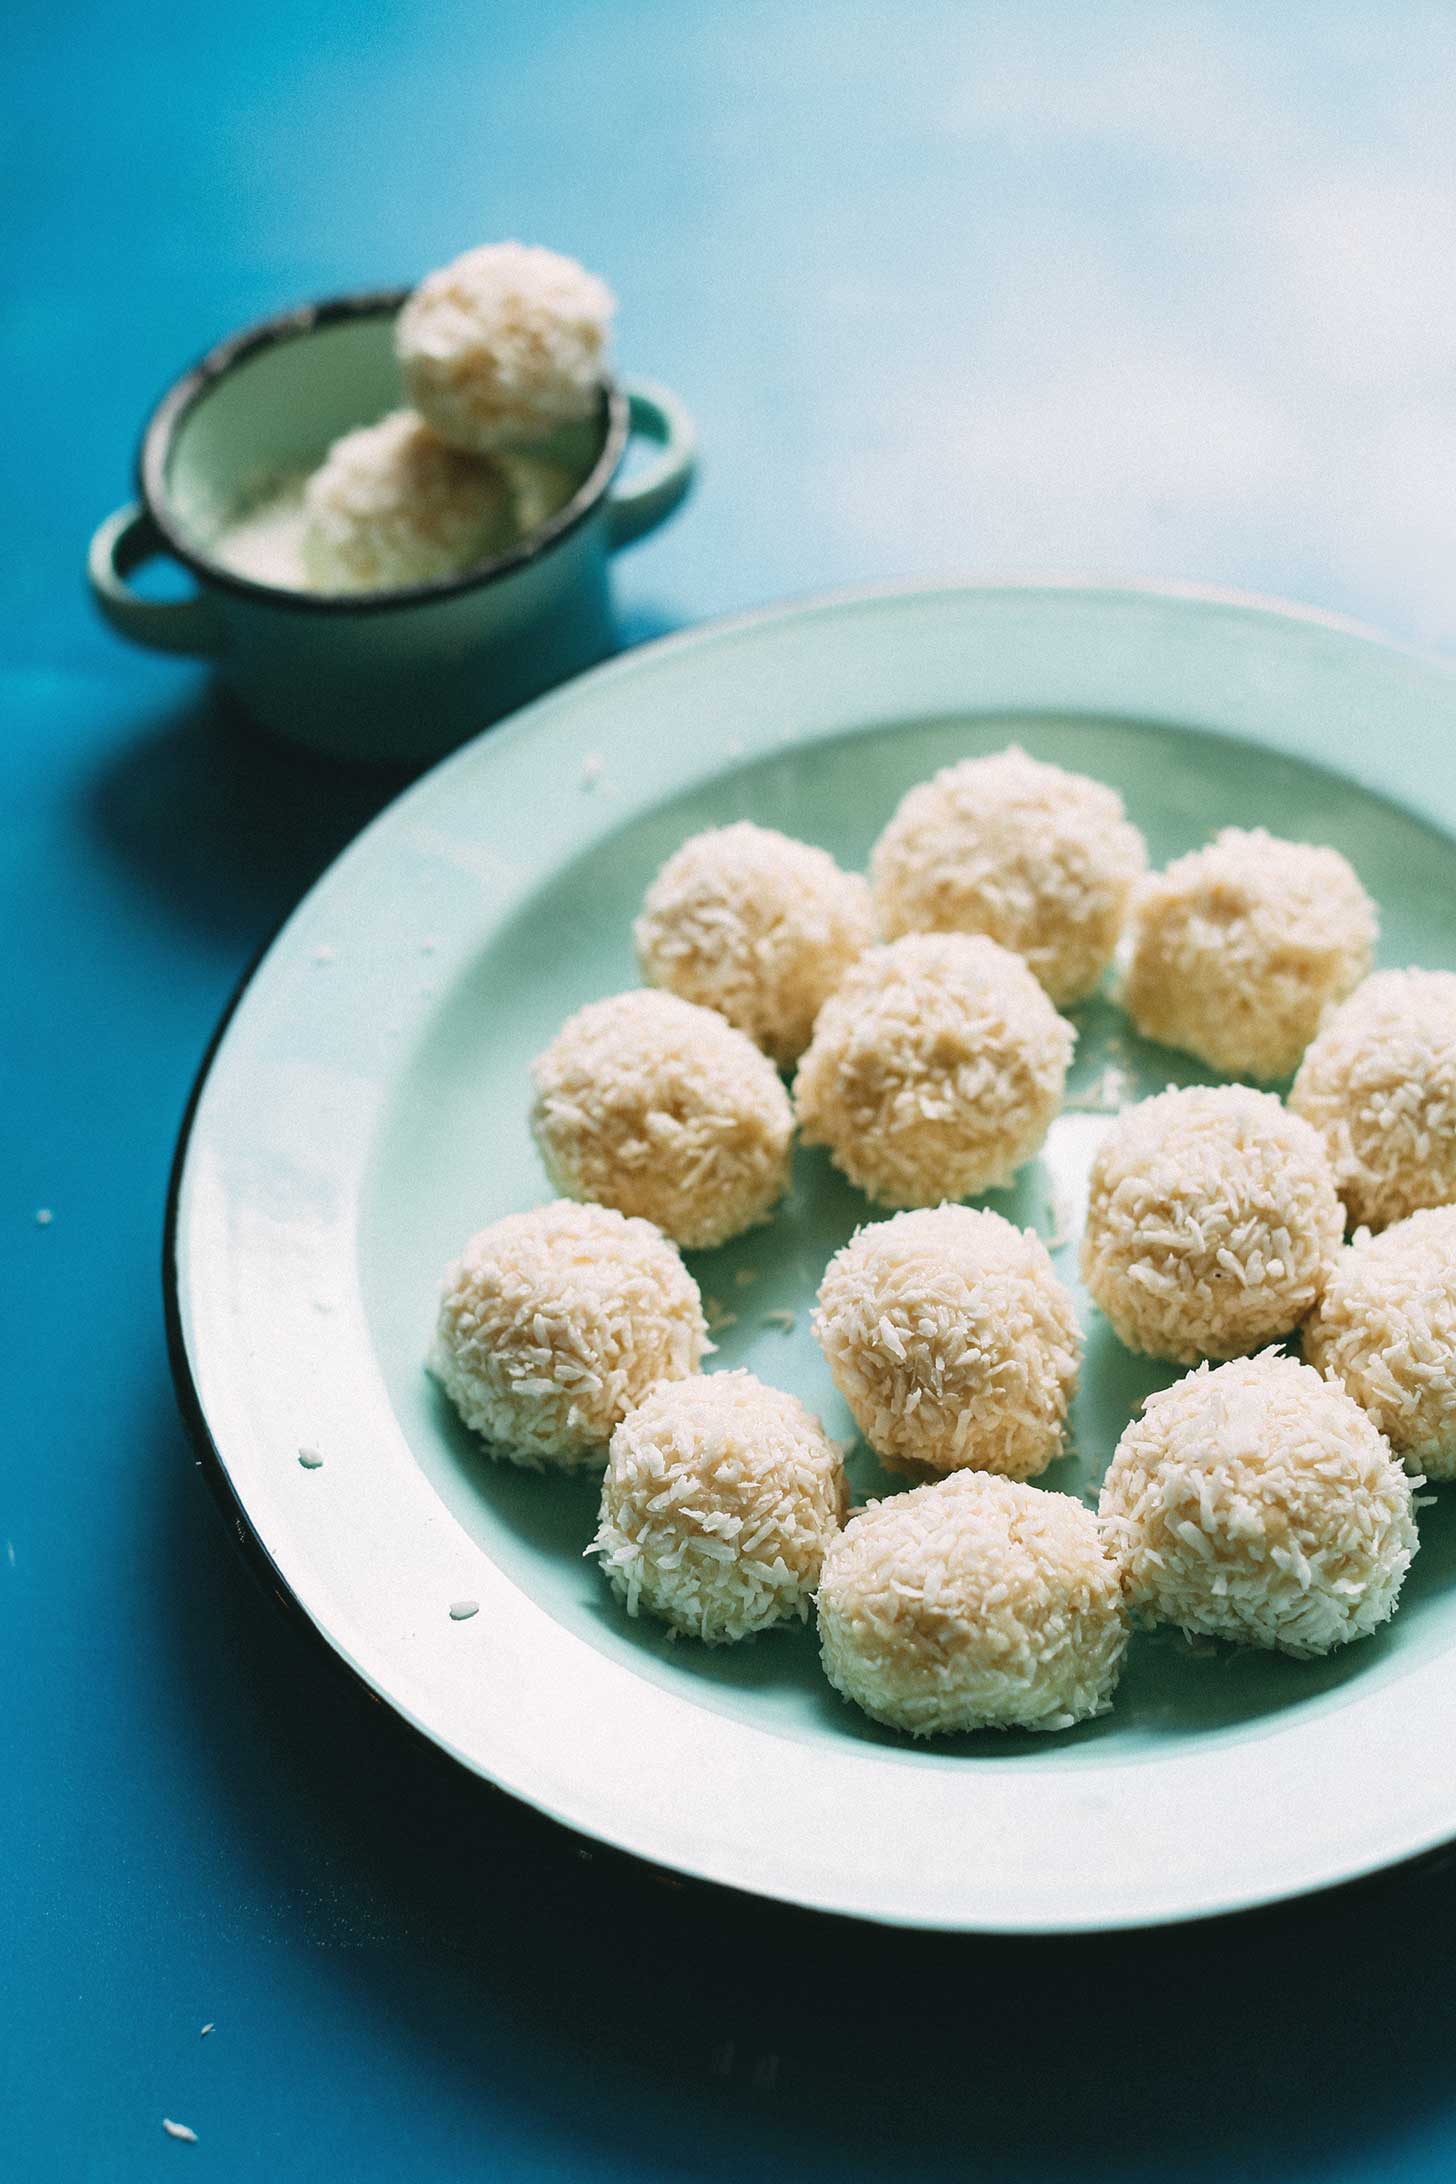 Plate with Vegan White Chocolate Truffles covered in coconut